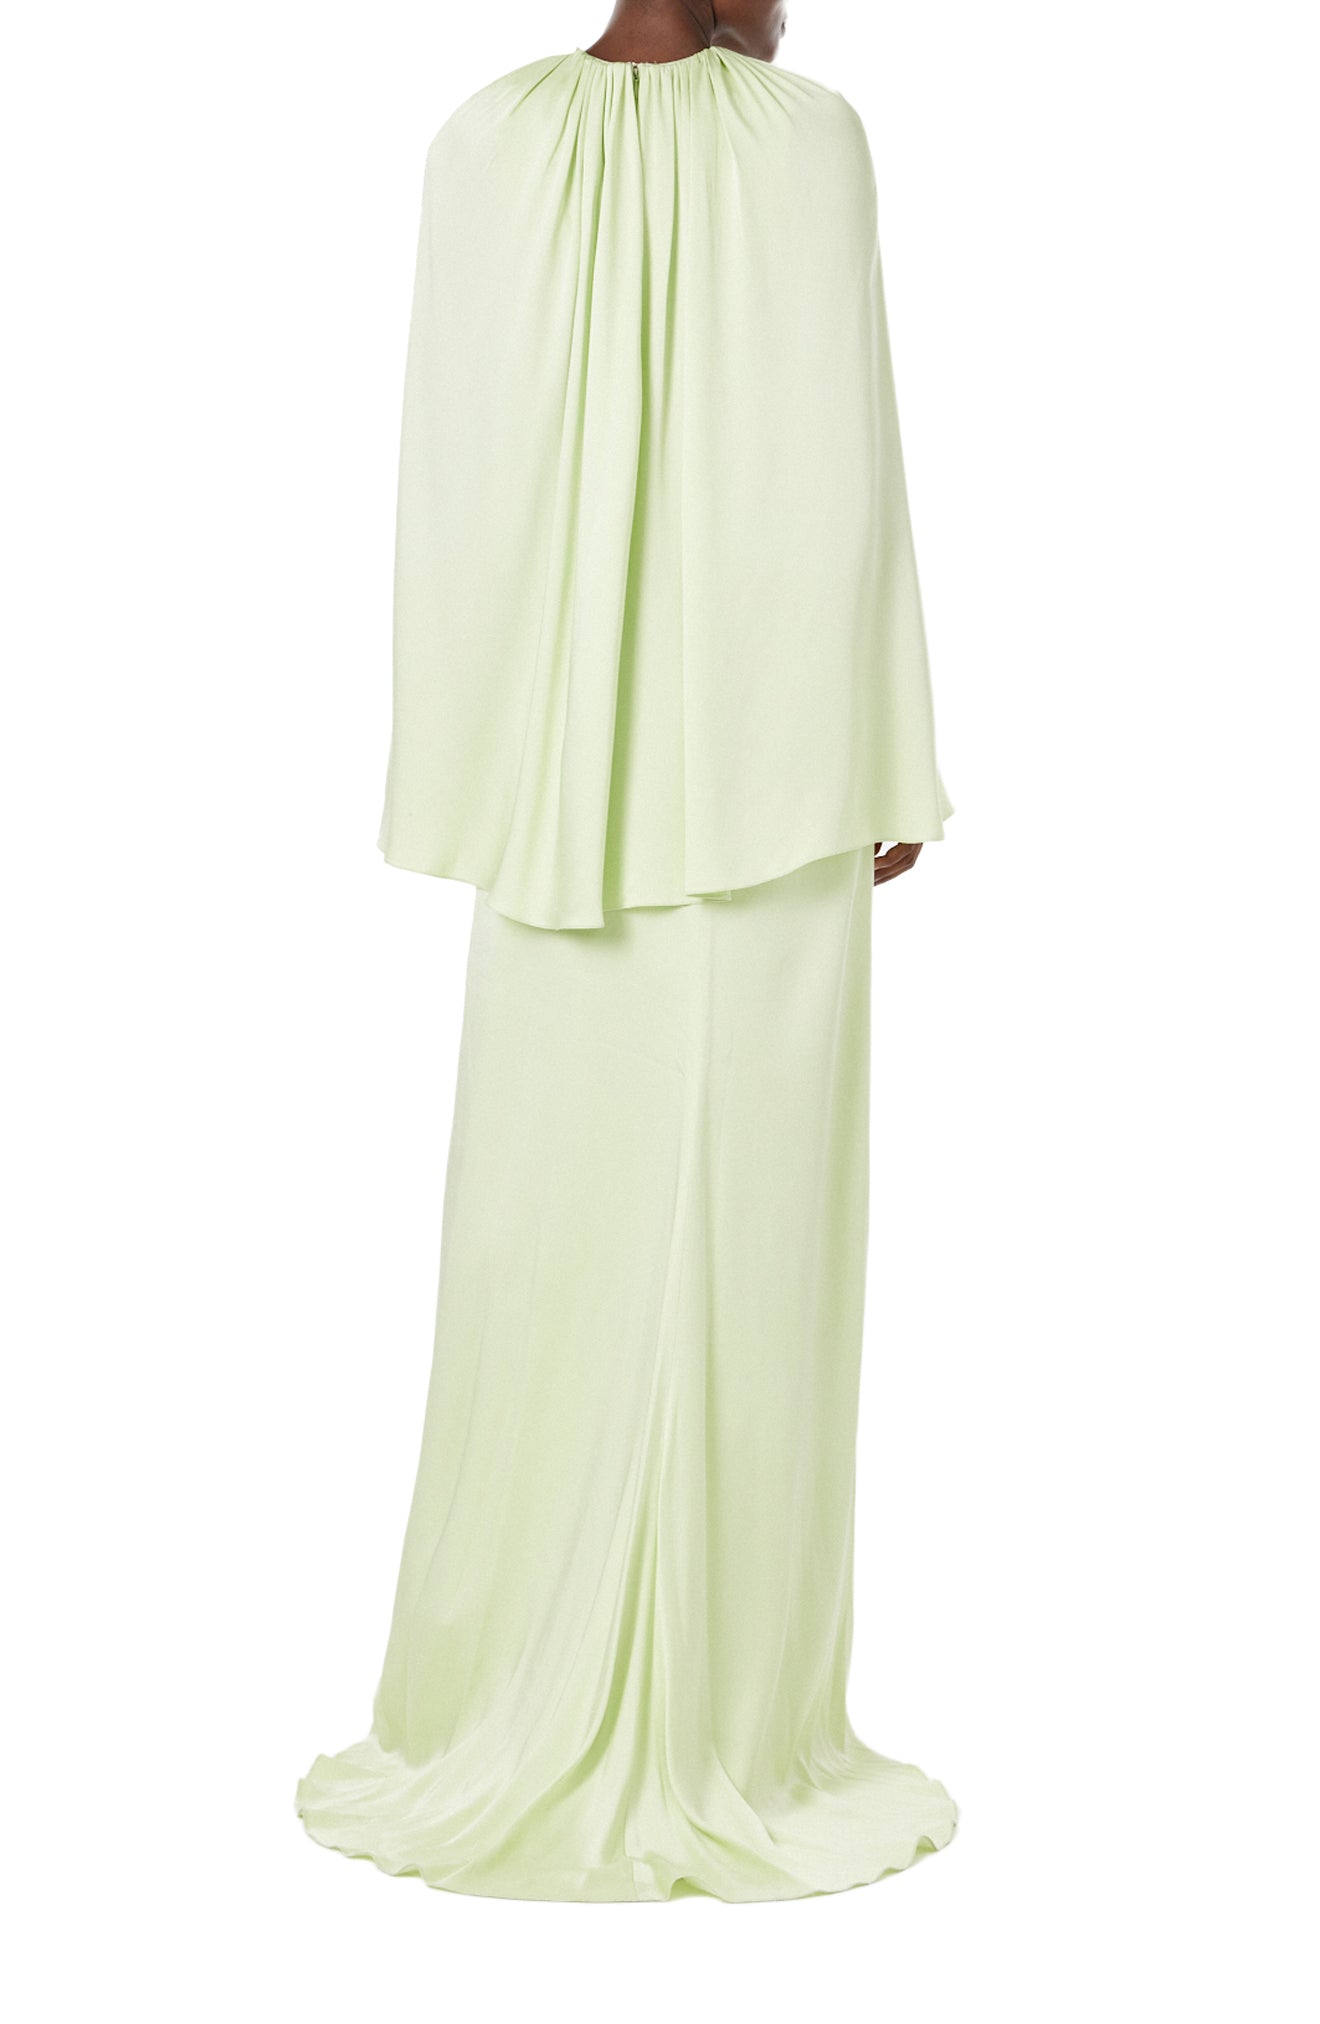 Monique Lhuillier Spring 2024 floor length capelet gown with jewel neckline in honeydew colored crepe back satin - back.